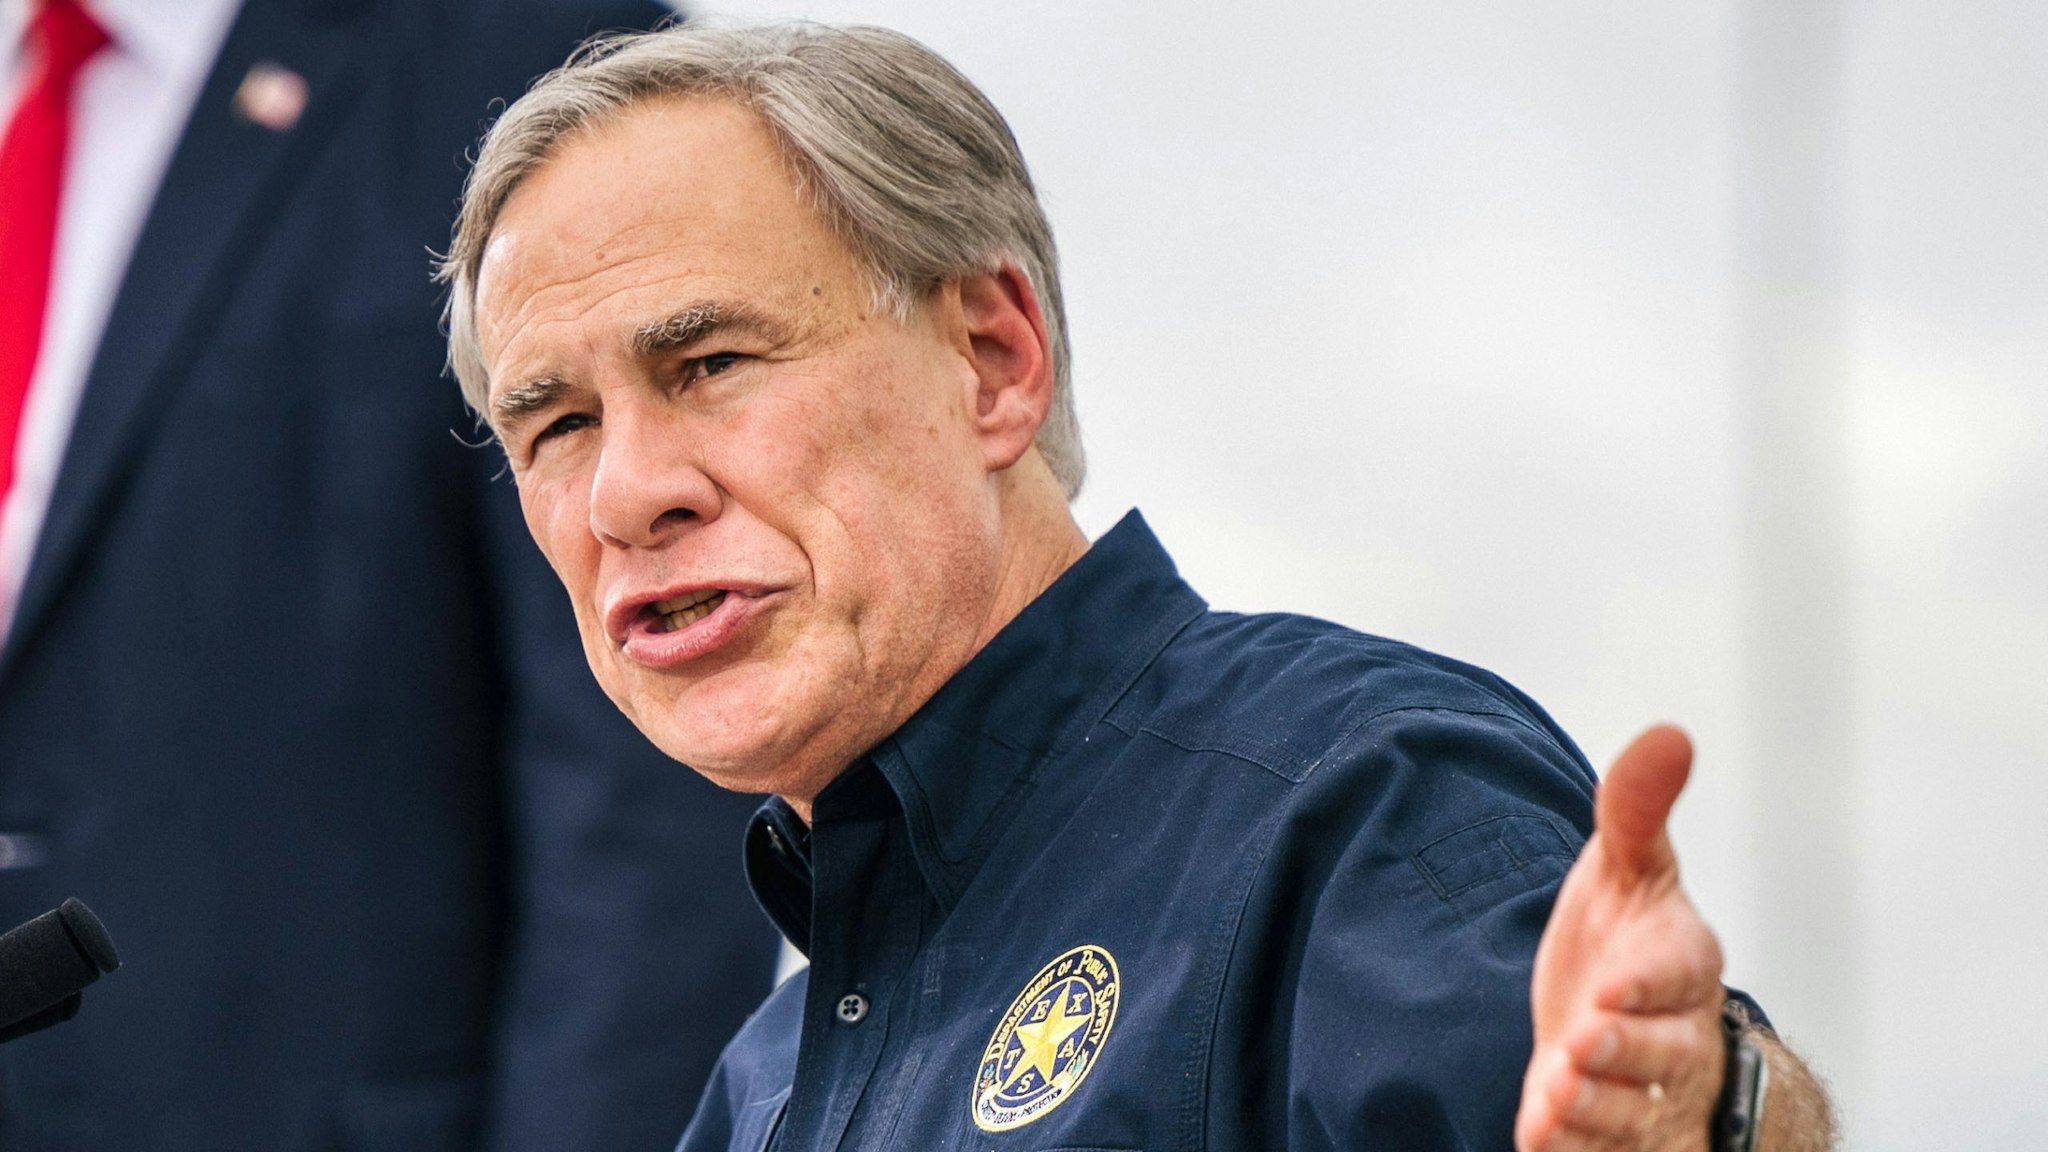 PHARR, TEXAS - JUNE 30: Texas Gov. Greg Abbott speaks alongside former President Donald Trump during a tour to an unfinished section of the border wall on June 30, 2021 in Pharr, Texas. Gov. Abbott has pledged to build a state-funded border wall between Texas and Mexico as a surge of mostly Central American immigrants crossing into the United States has challenged U.S. immigration agencies. So far in 2021, U.S. Border Patrol agents have apprehended more than 900,000 immigrants crossing into the United States on the southern border.